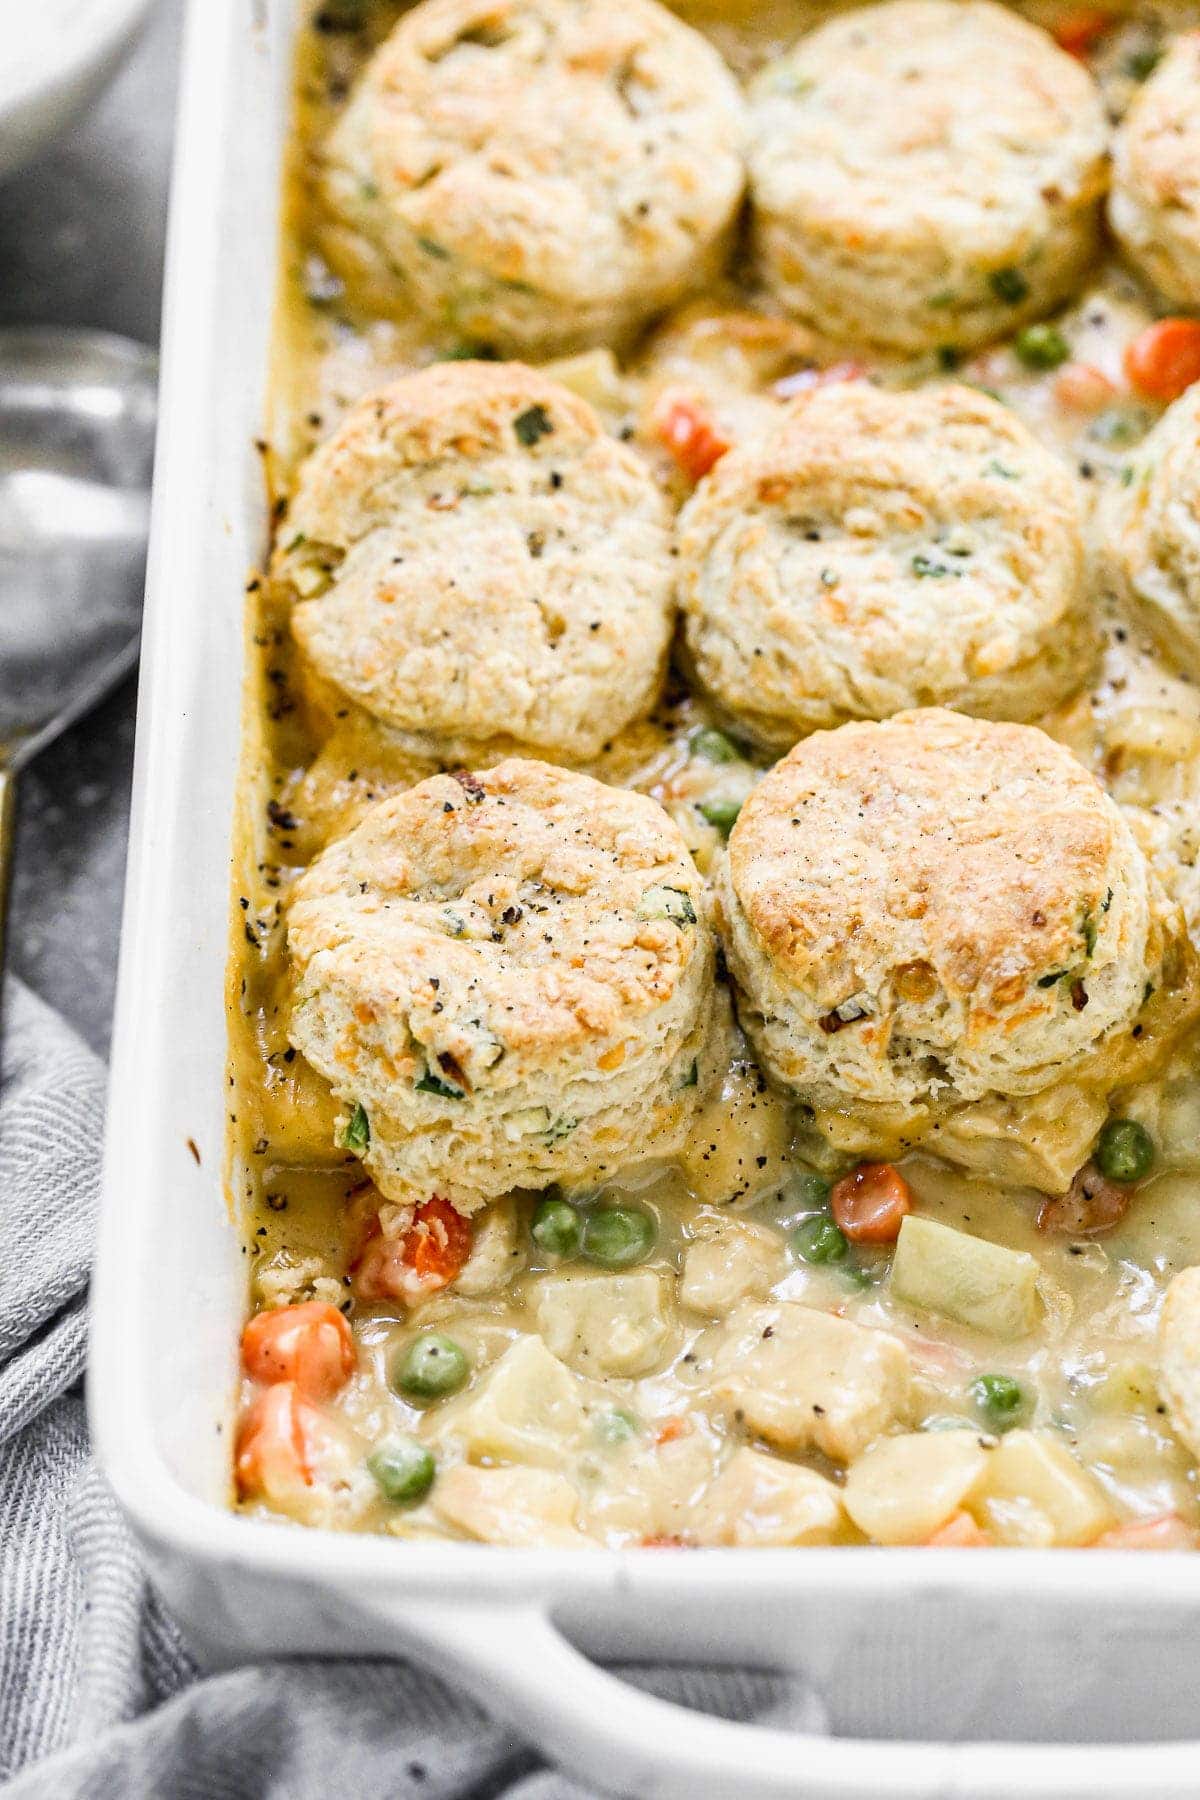 Possibly our favorite comfort food of fall, this Chicken Pot Pie with Biscuits is cozy, delicious and a such fun twist on traditional chicken pot pie. We take a classic creamy pot pie filling full of chicken, carrots, celery, and potatoes and stud it with sharp cheddar cheese and then top it off with fluffy, tender cheddar chive biscuits. Heaven in a casserole dish.